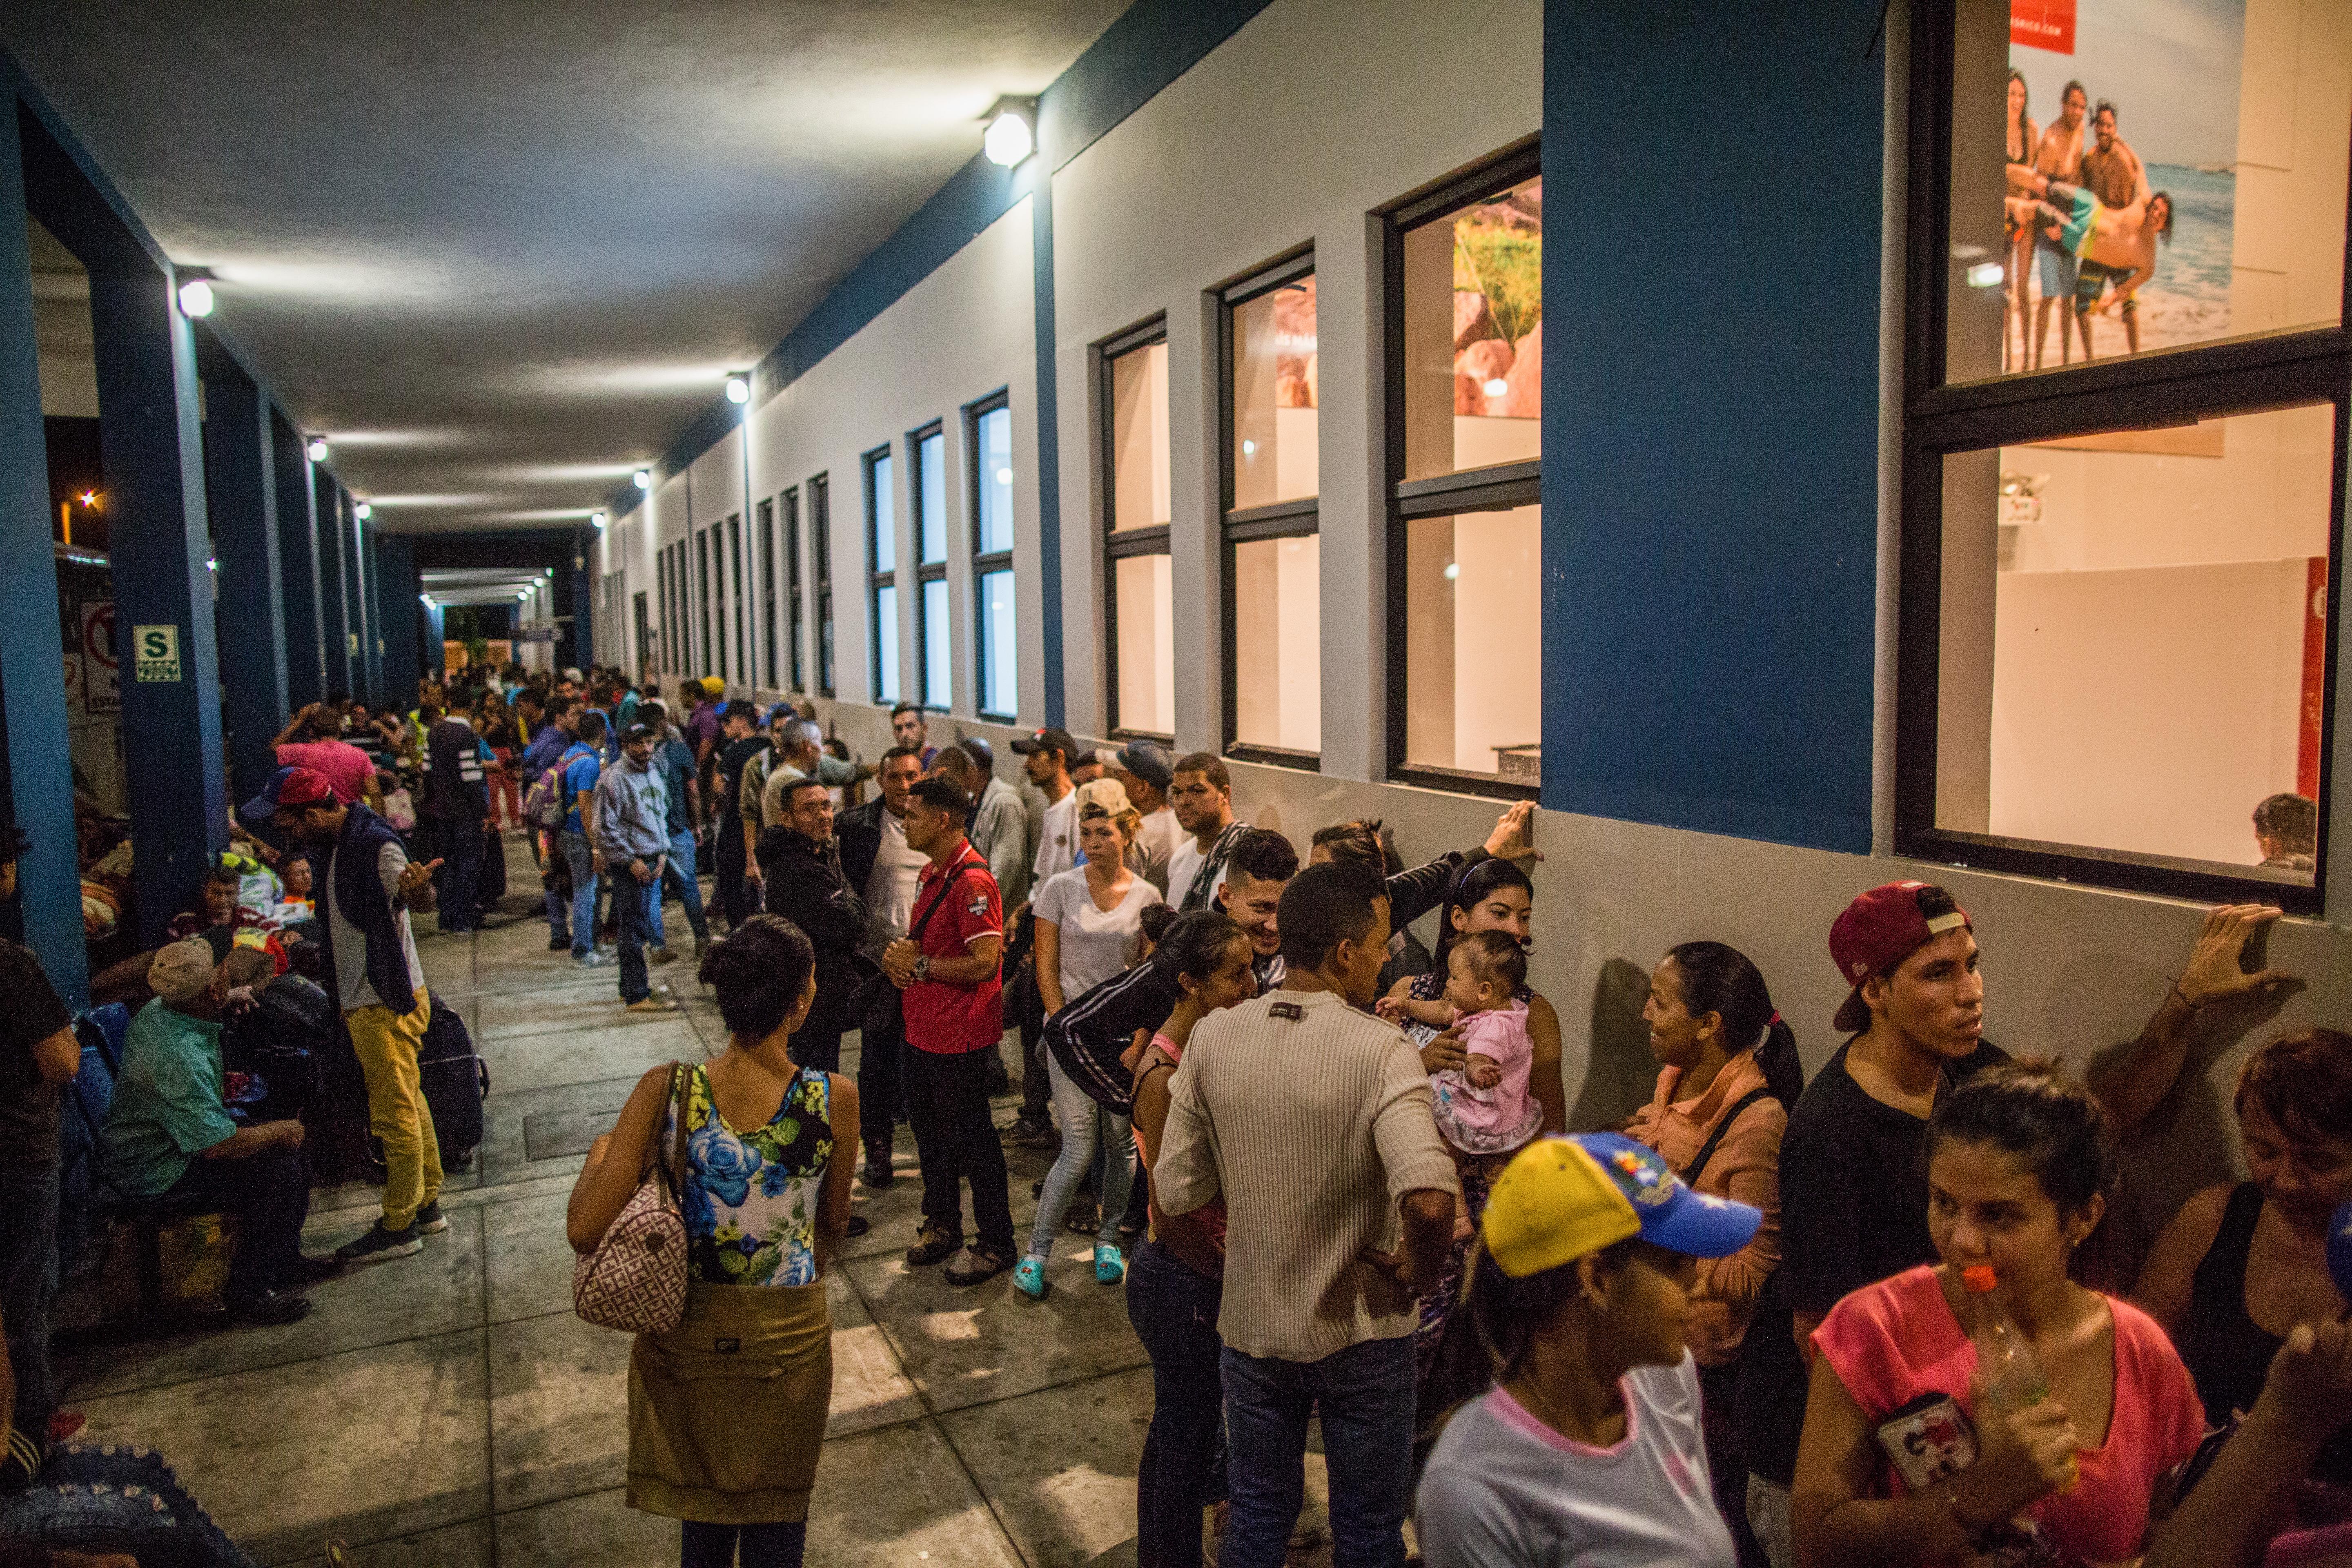 Venezuelans waiting and queuing inside a building.